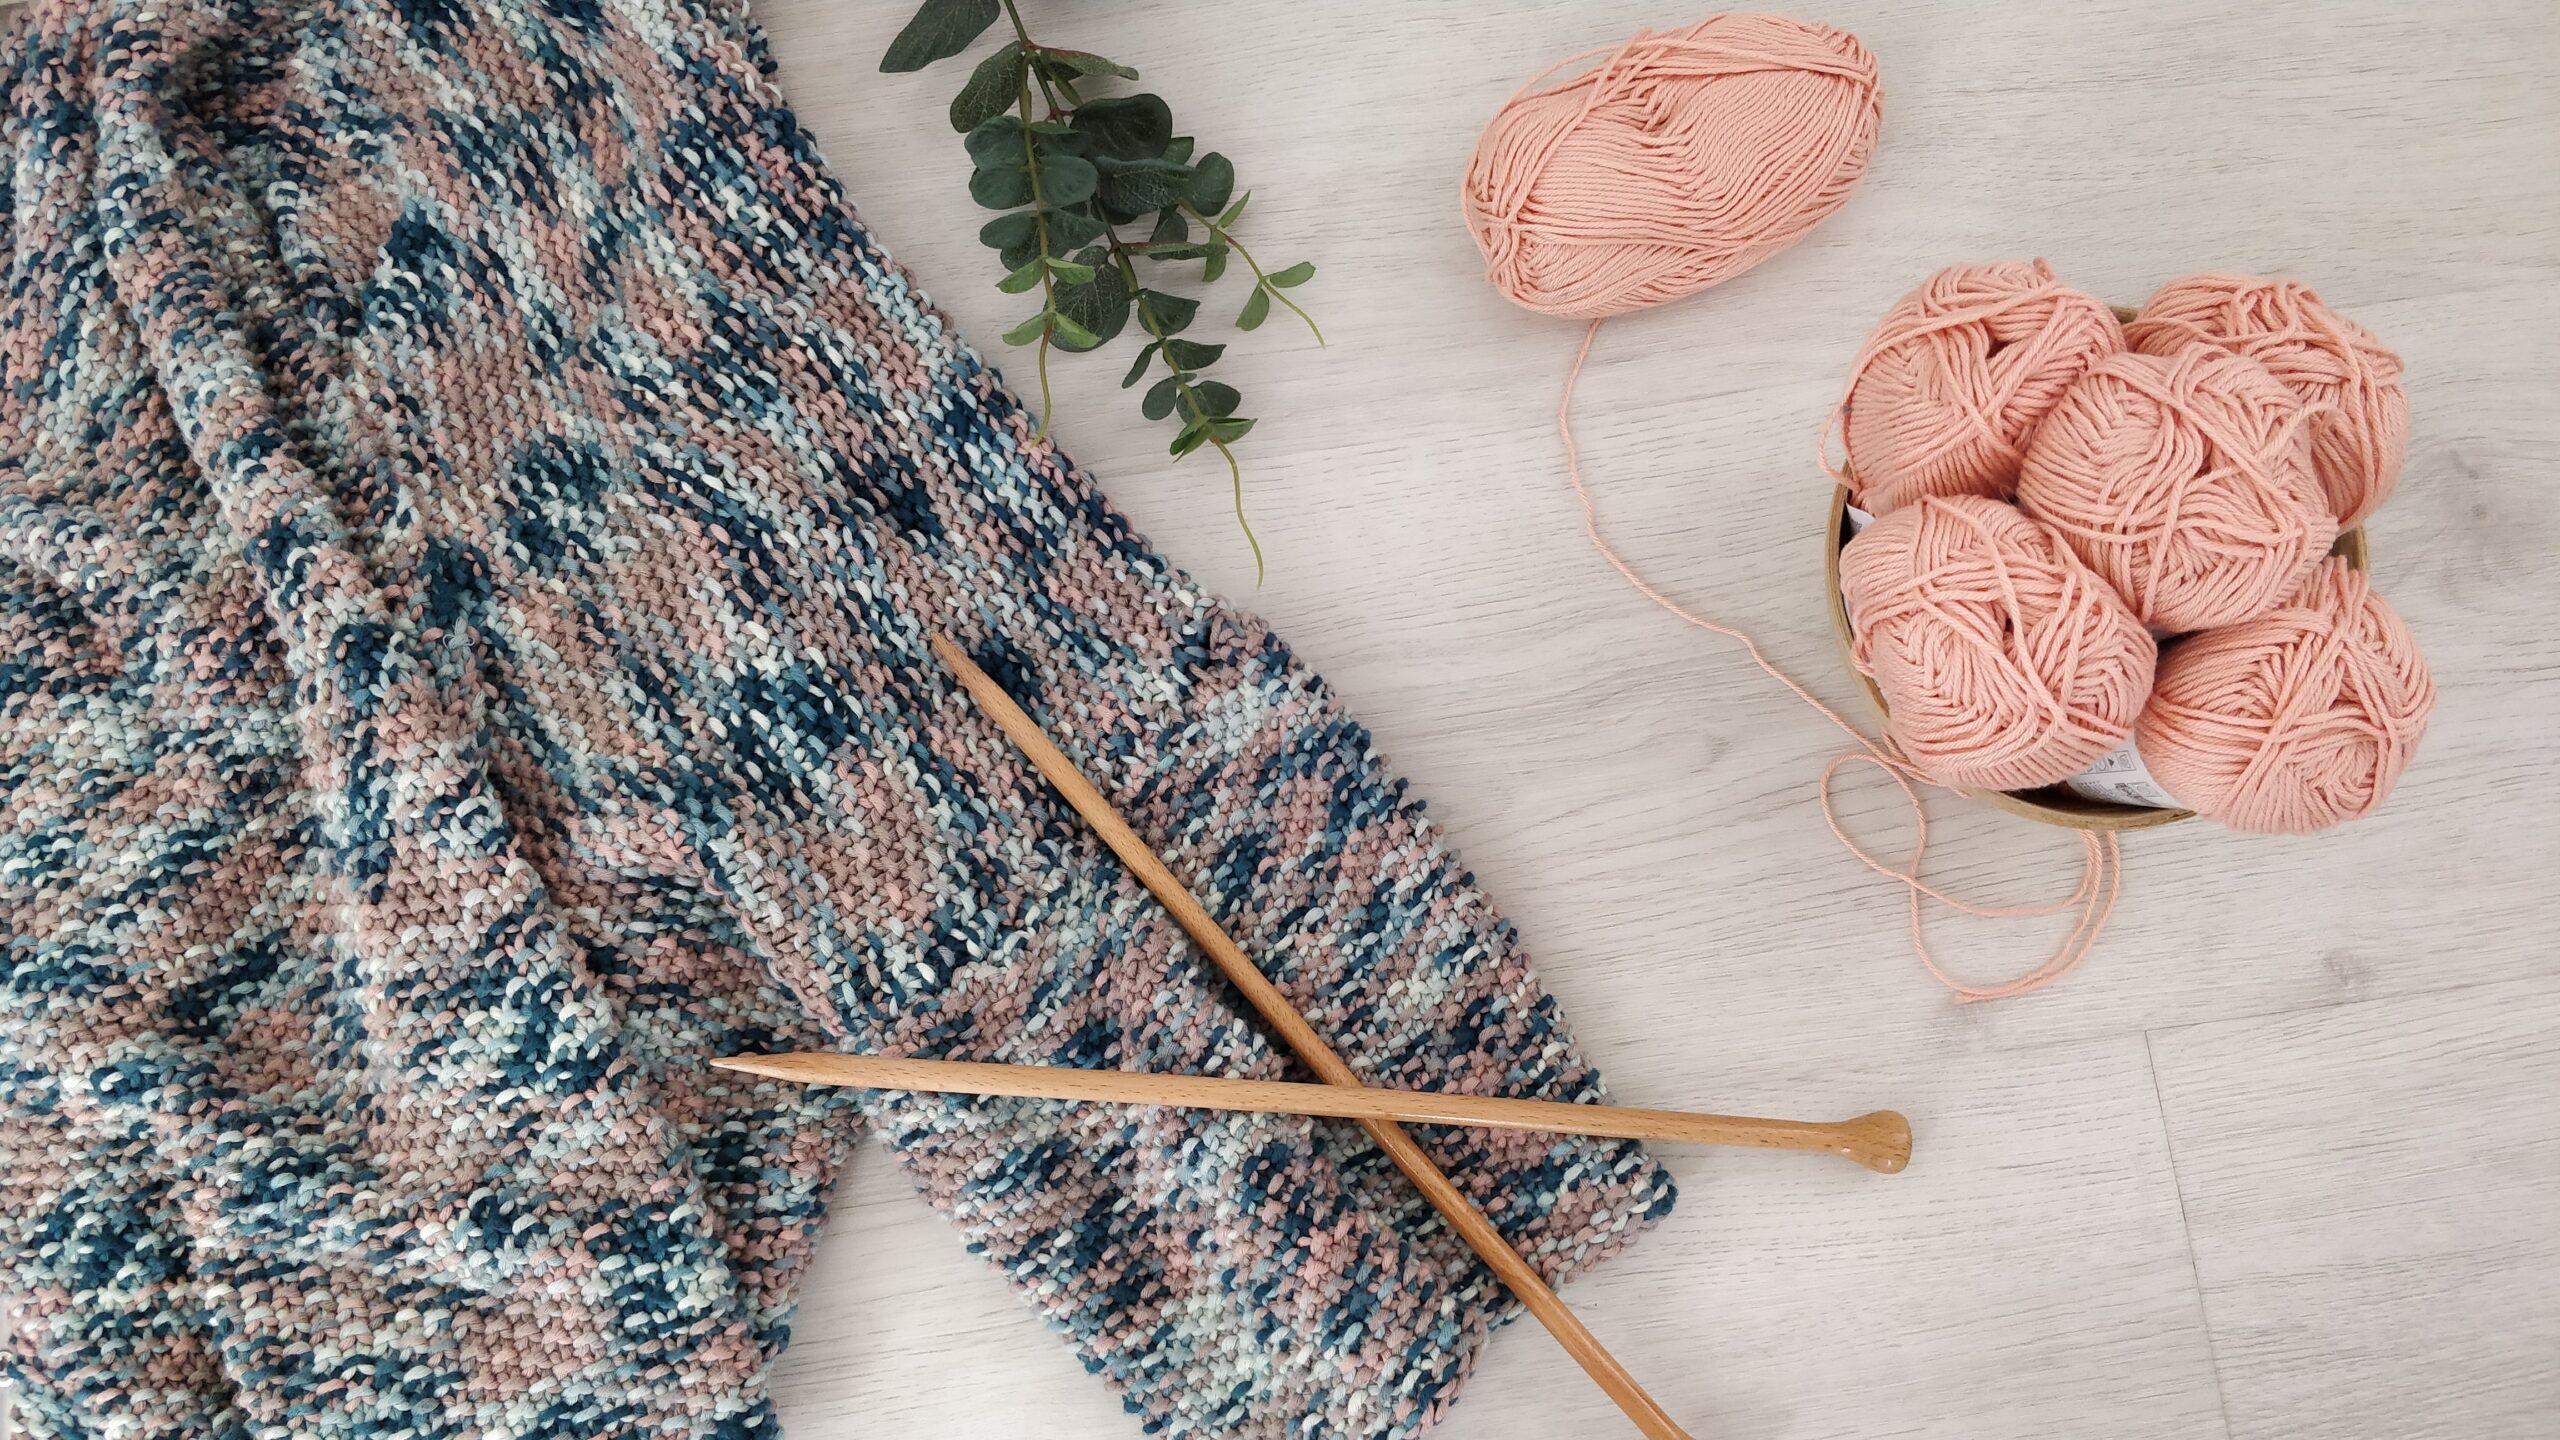 14 Free Unique Knitted Gifts For Grandmothers Patterns They'll Surely Love  - The Knit Crew